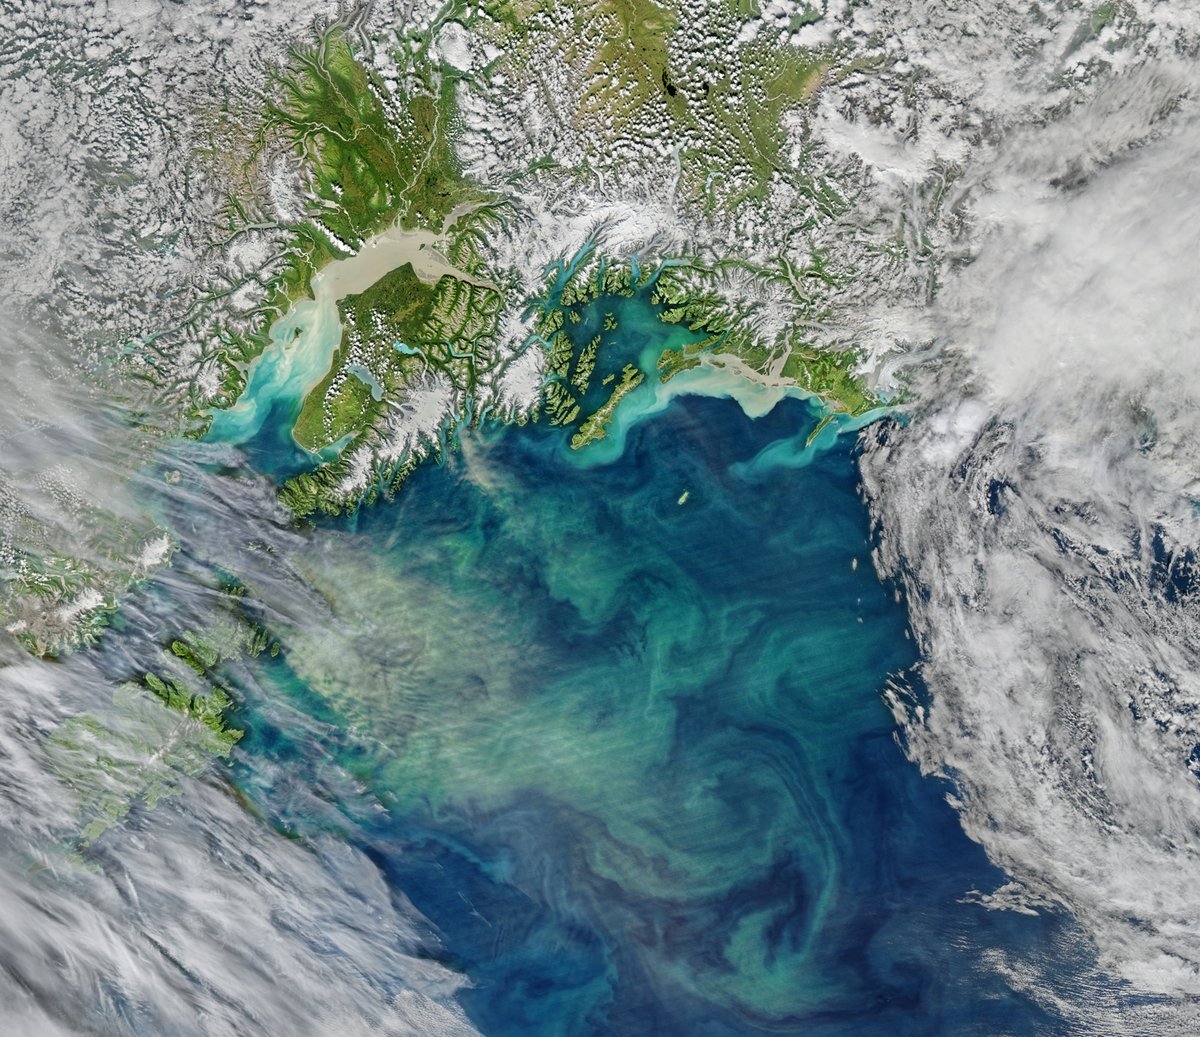 Scientists studied how ocean heatwaves affected phytoplankton in the open Pacific Ocean using satellite data, models and @NASA_NCCS supercomputers. 🌊 #WorldOceanMonth 

Full story: go.nasa.gov/3PcyWOl